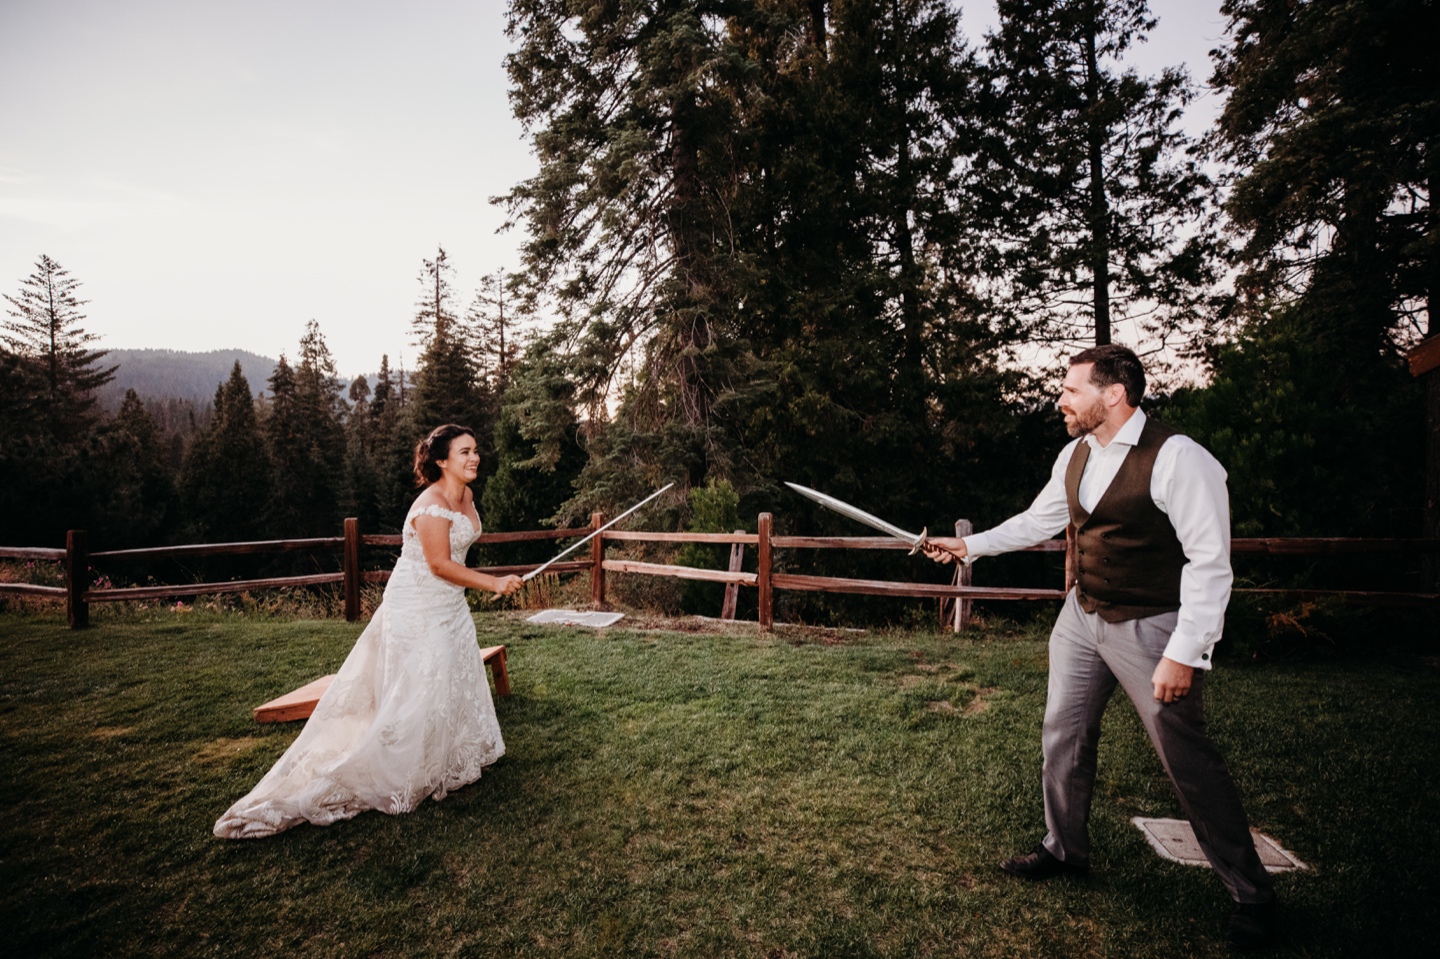 Bride and groom fight with swords during their Yosemite wedding reception at Tenaya Lodge